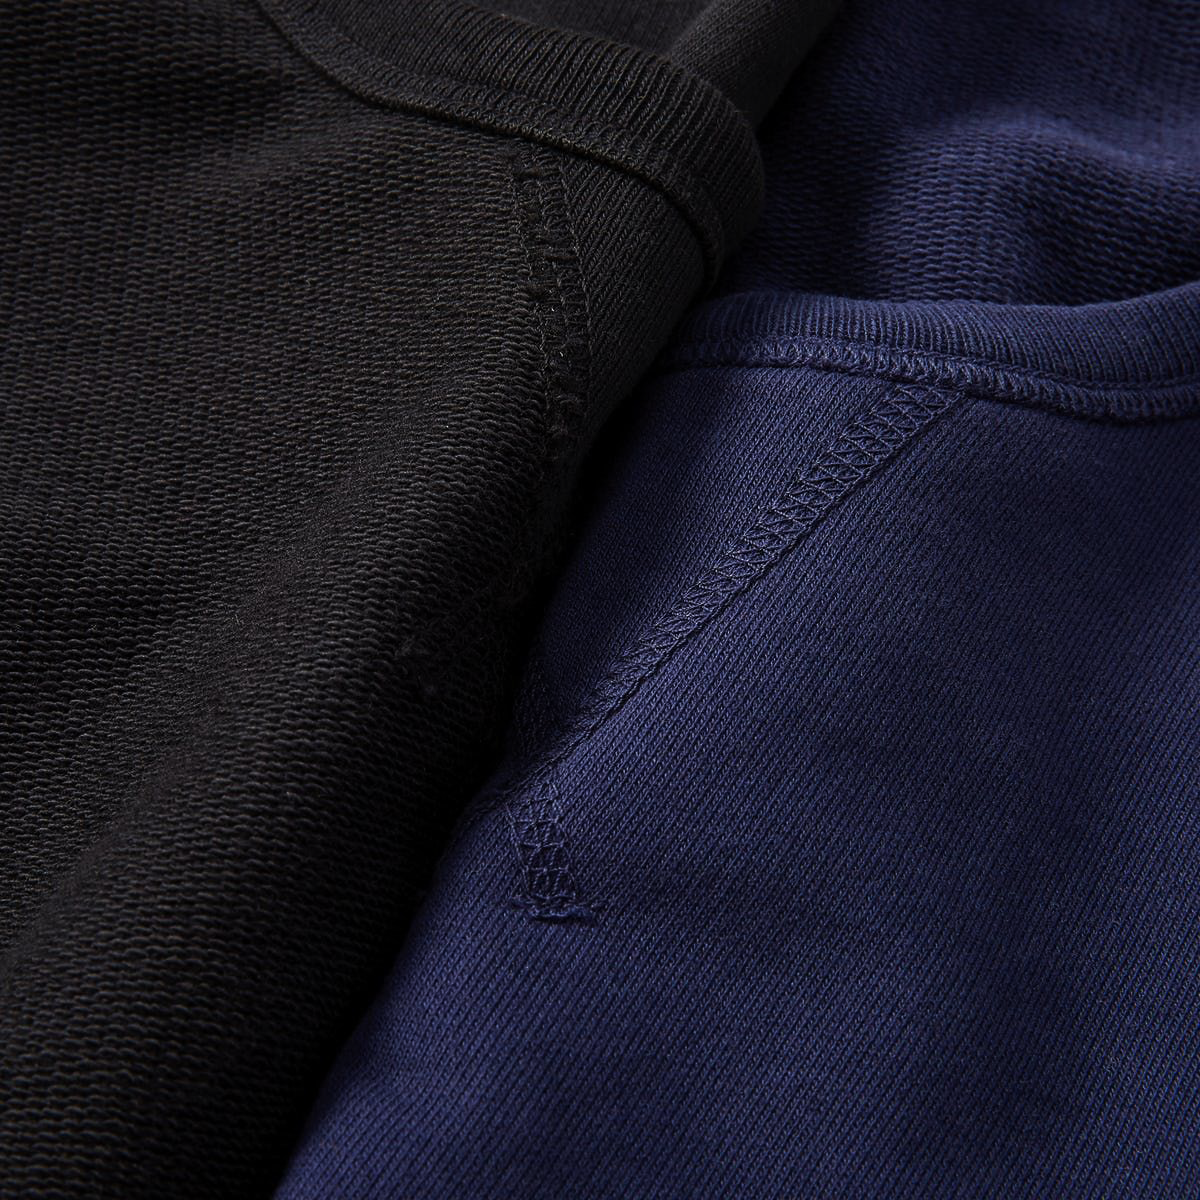 Flint & Tinder's Reversible French Terry Sweatshirt Is On Sale Now - Airows